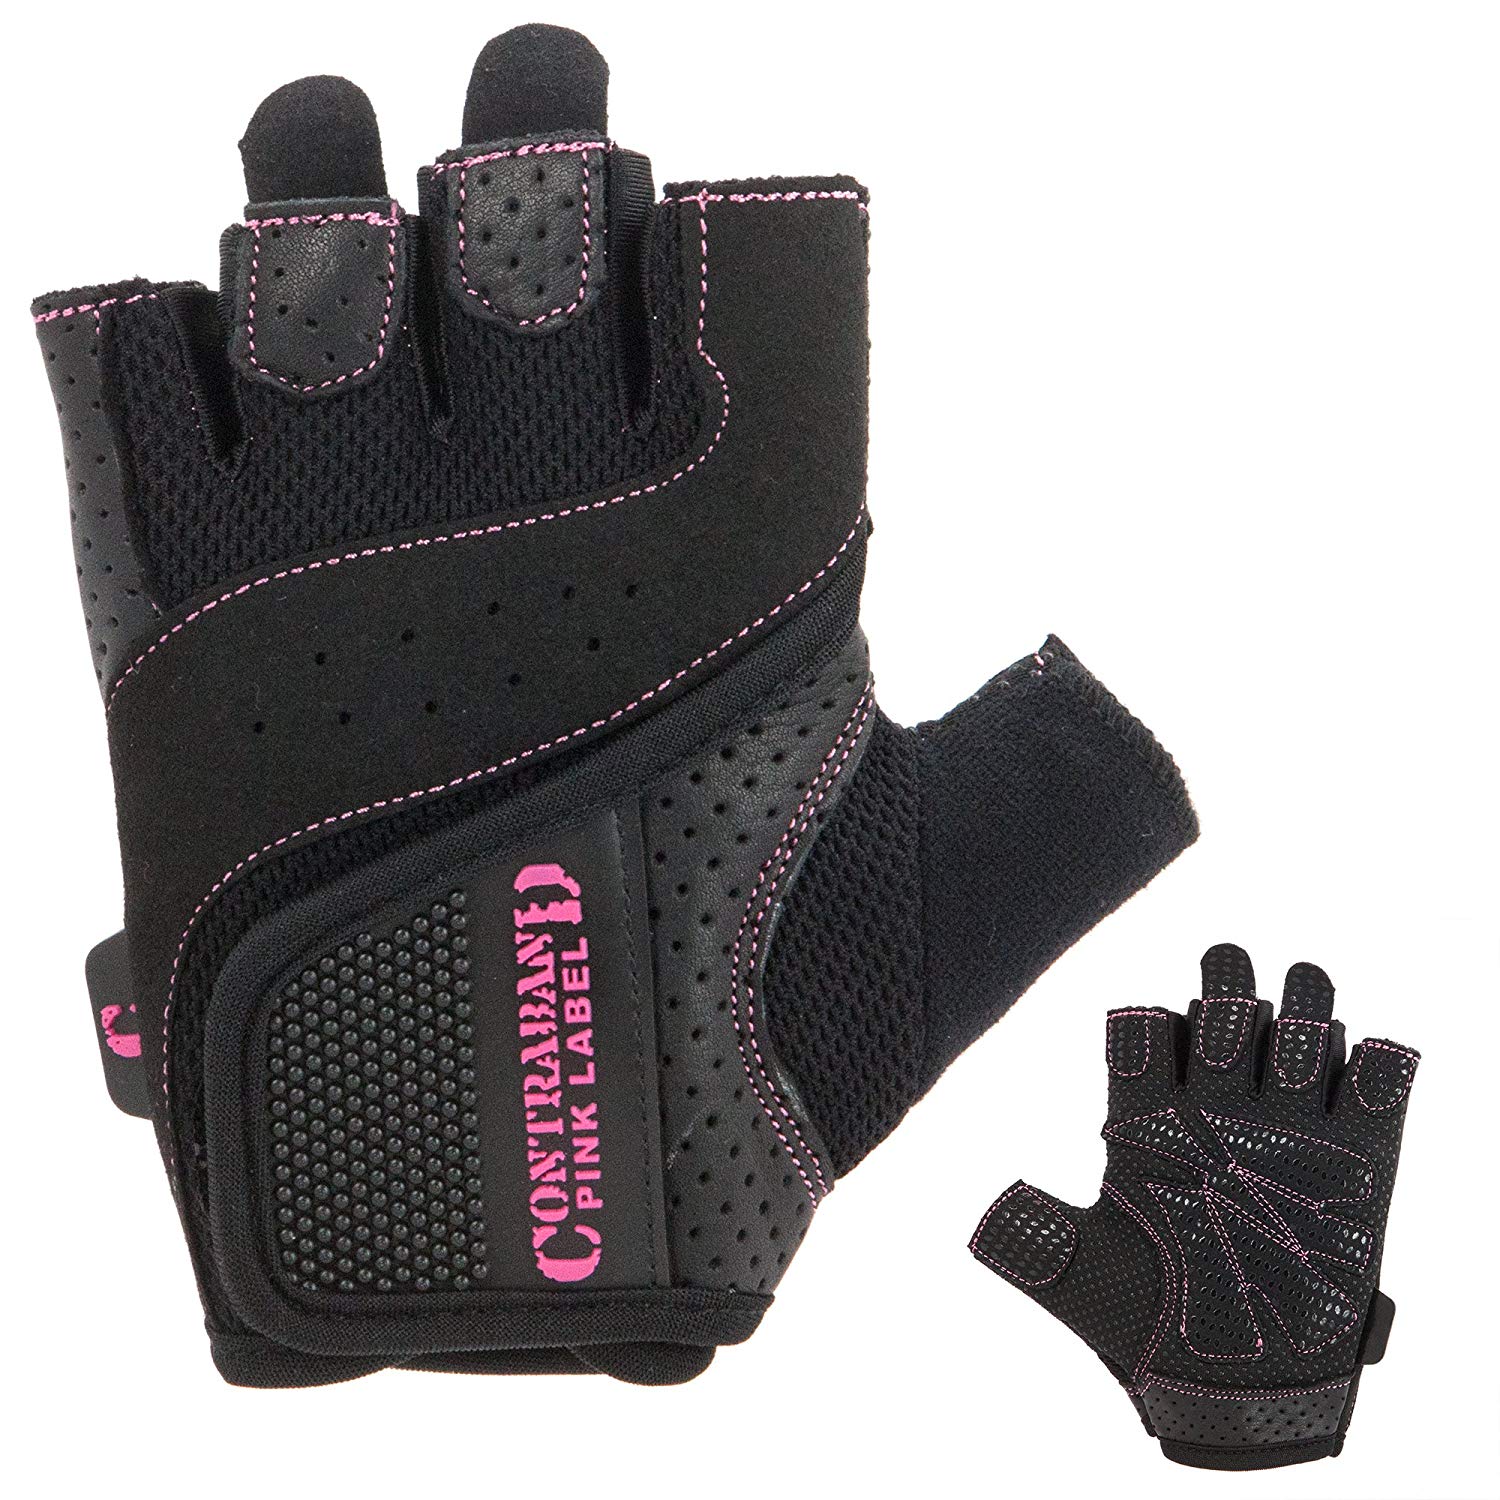 Contraband Pink Label 5137 Weight Lifting Gloves for Women